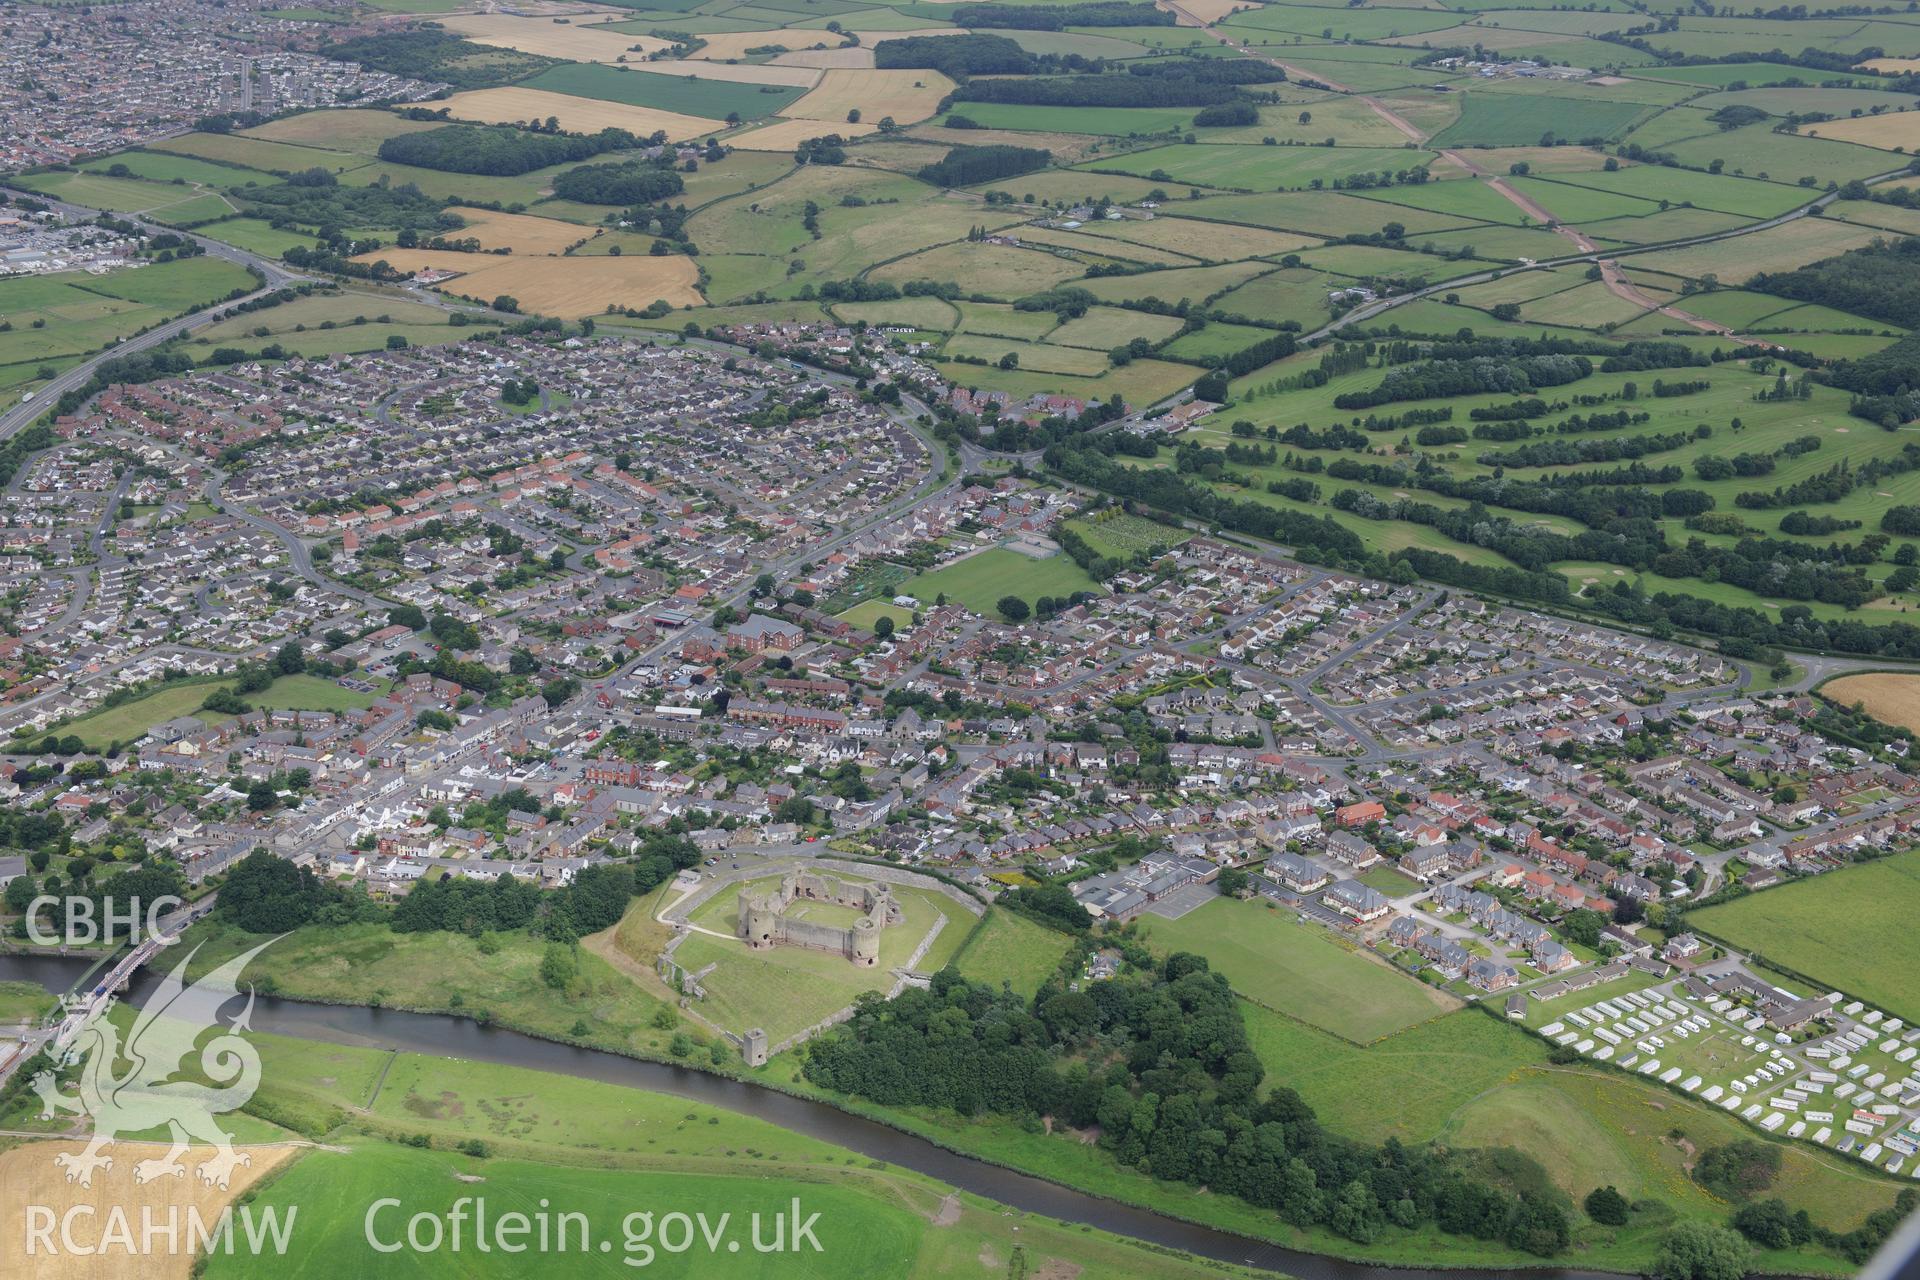 Rhuddlan Castle, Edwardian town defences, bridge, Twt Hill motte and bailey and Norman borough. Oblique aerial photograph taken during the Royal Commission's programme of archaeological aerial reconnaissance by Toby Driver on 30th July 2015.